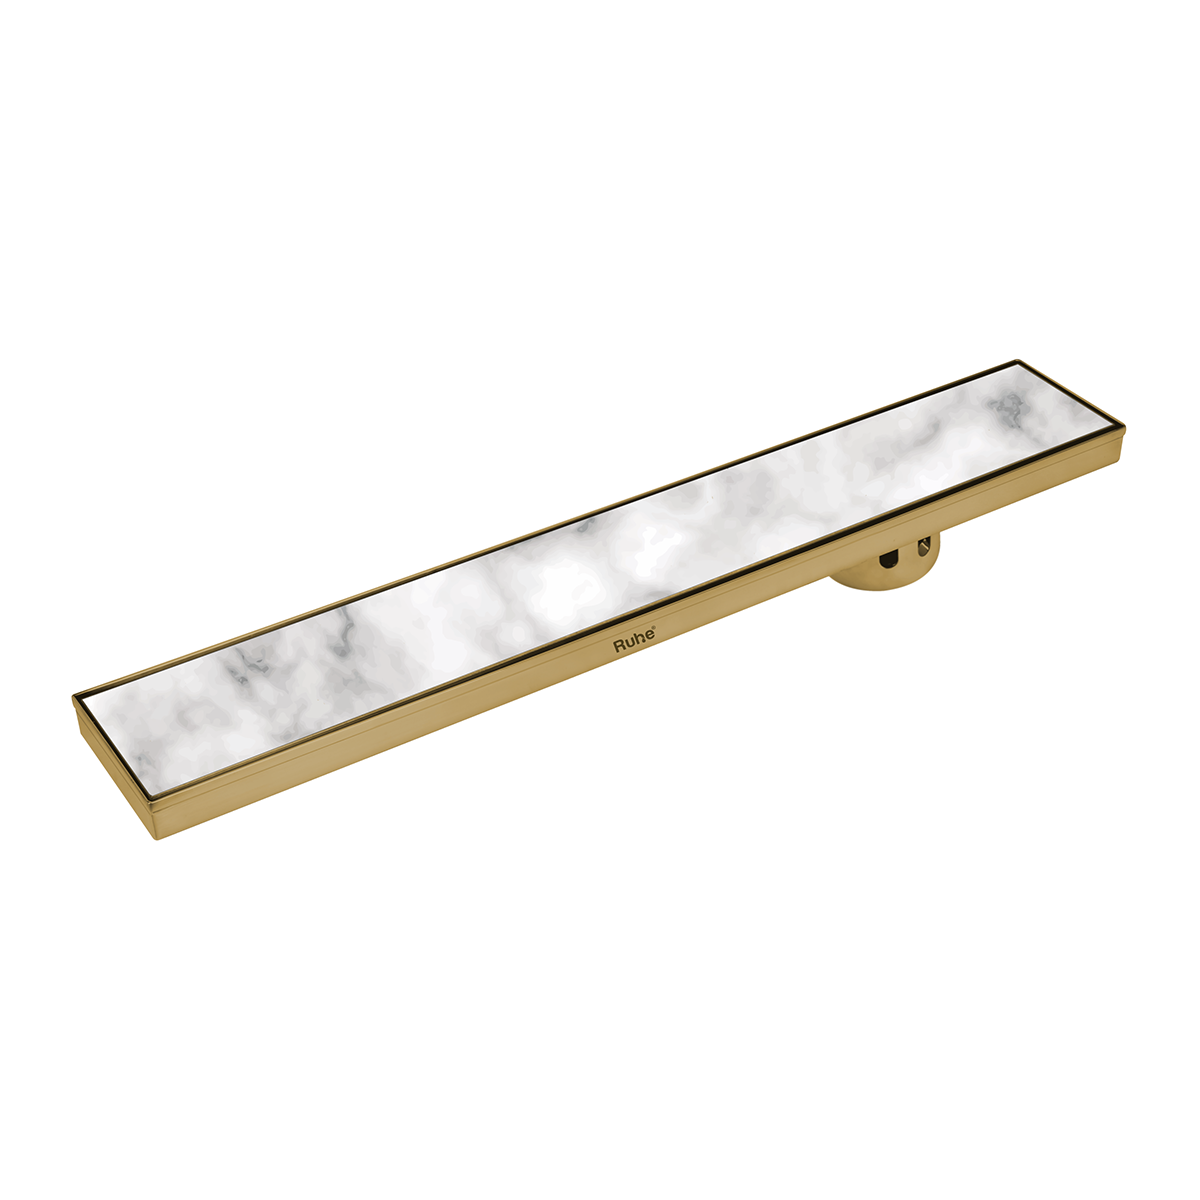 Marble Insert Shower Drain Channel (32 x 4 Inches) YELLOW GOLD PVD Coated